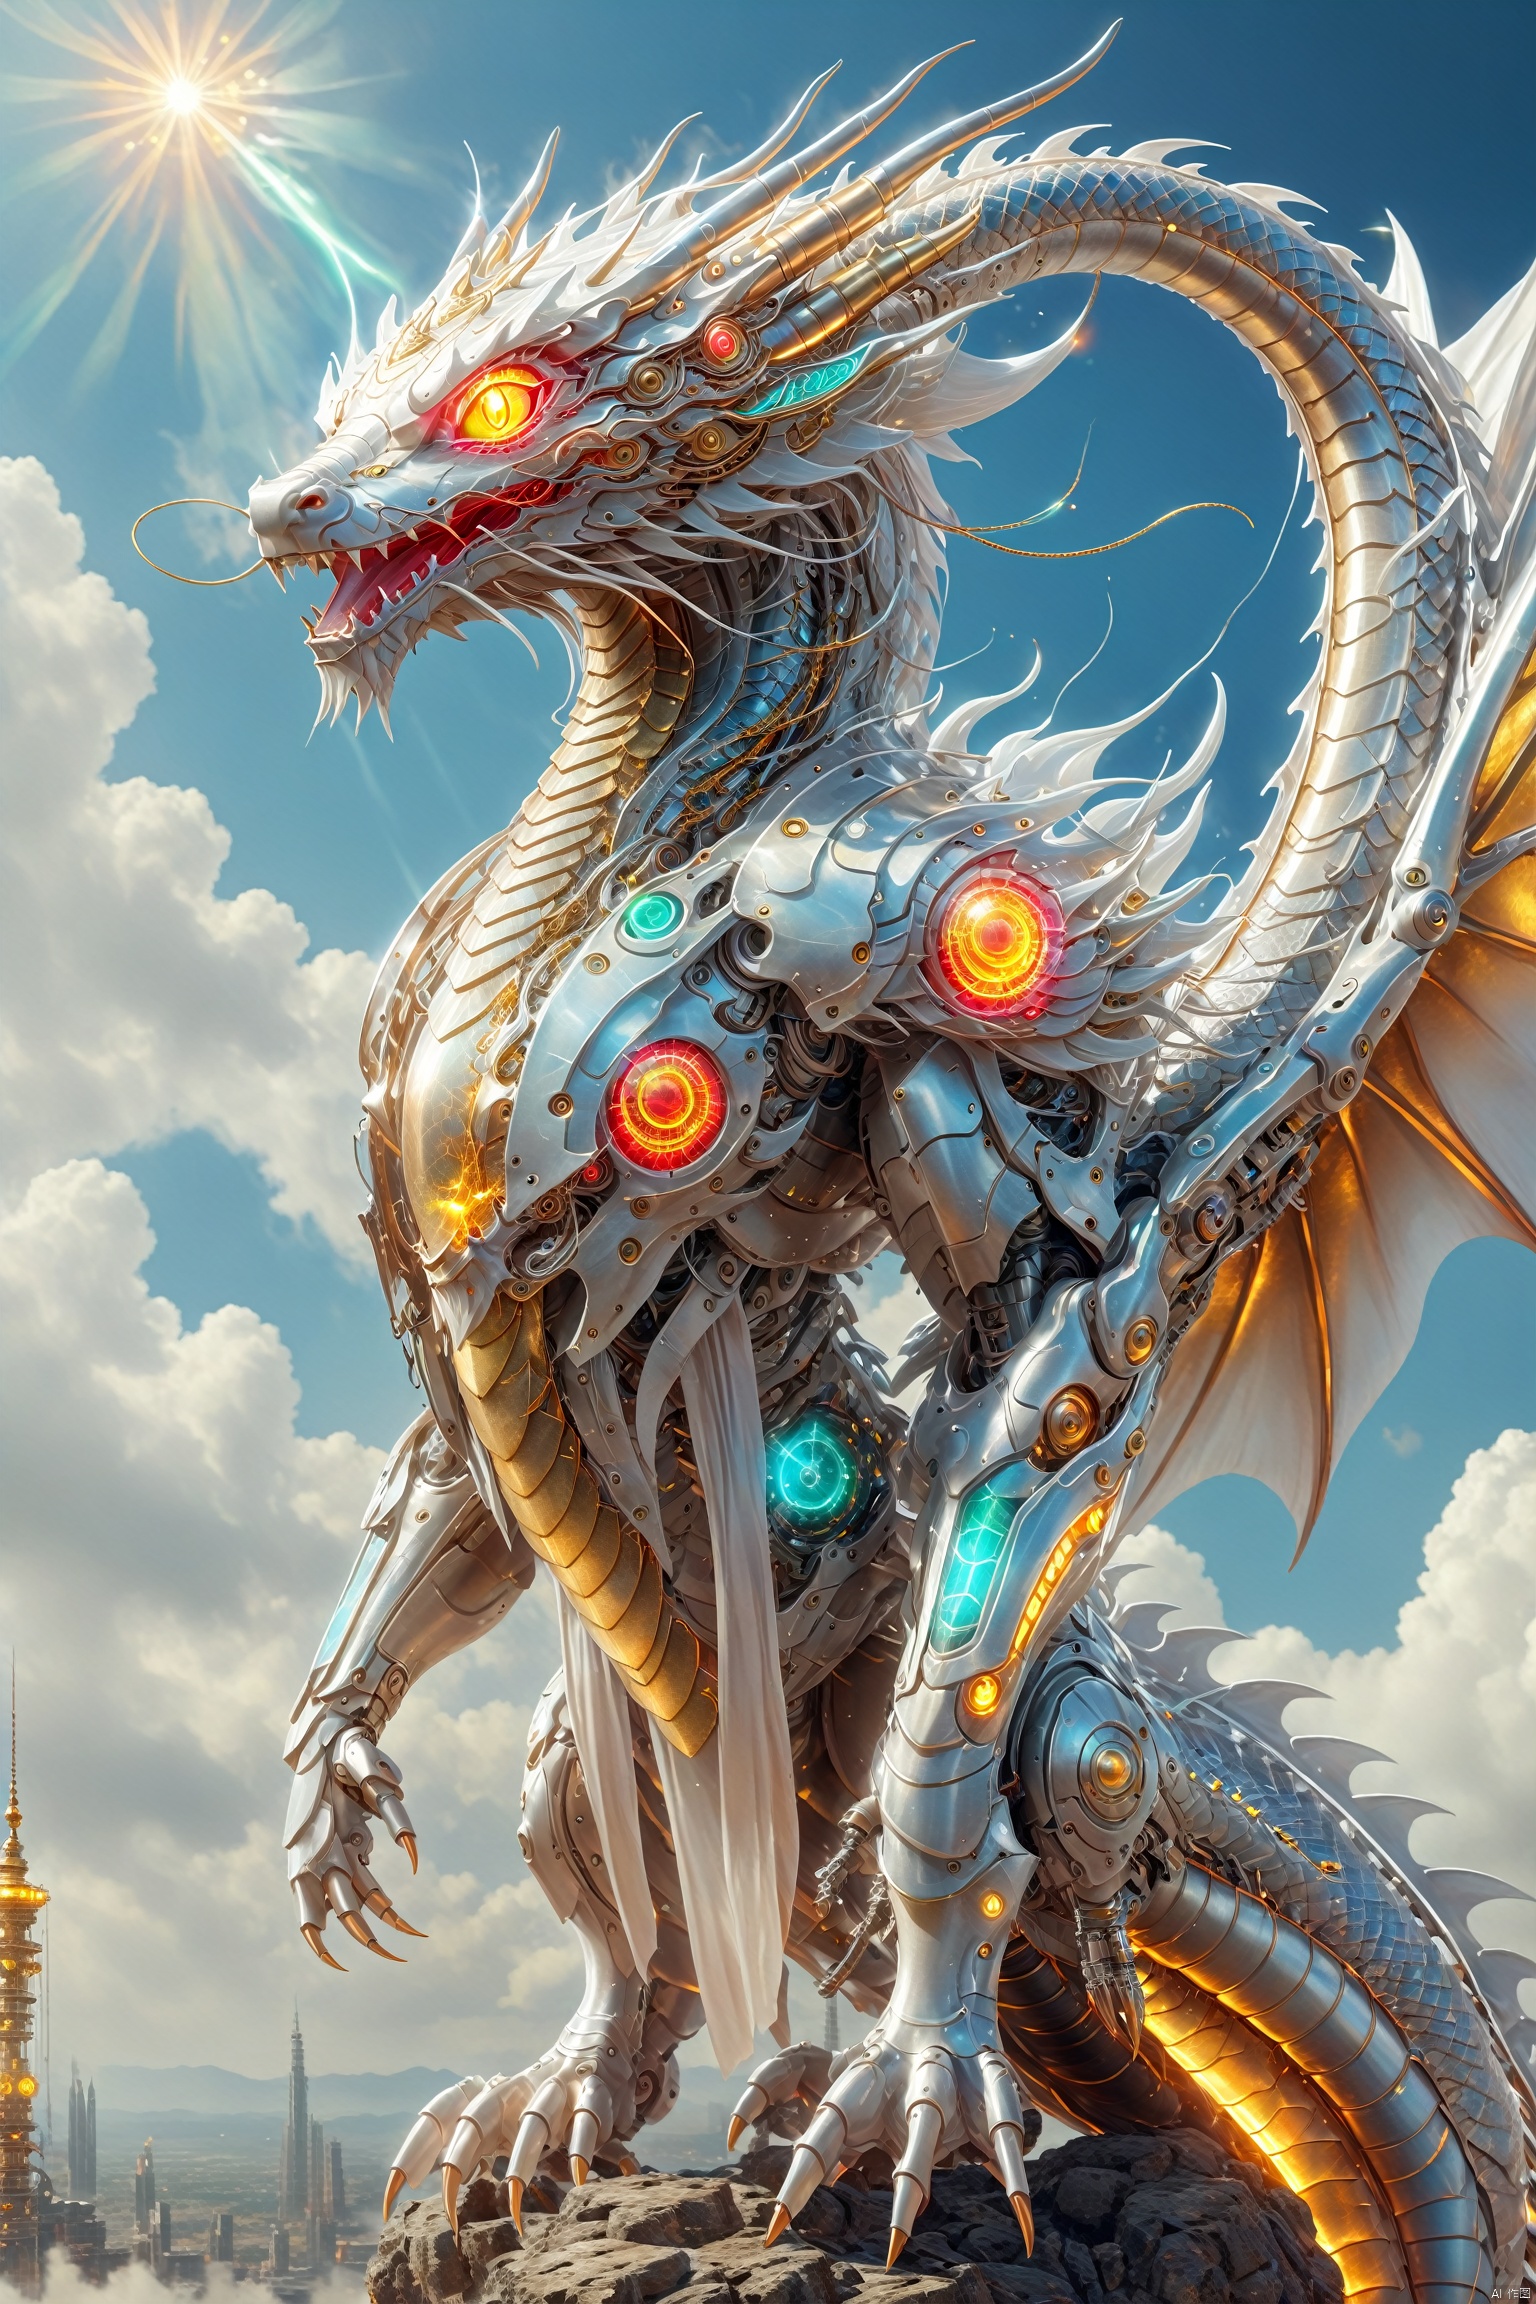  A huge cyberpunk style dragon is flying in the sky, its body made of metal and machinery, shining with golden light. Its wings spread out, as if flying in the clouds. The dragon's eyes emit a laser, giving people a mysterious and powerful feeling. High definition, clear and realistic painting art